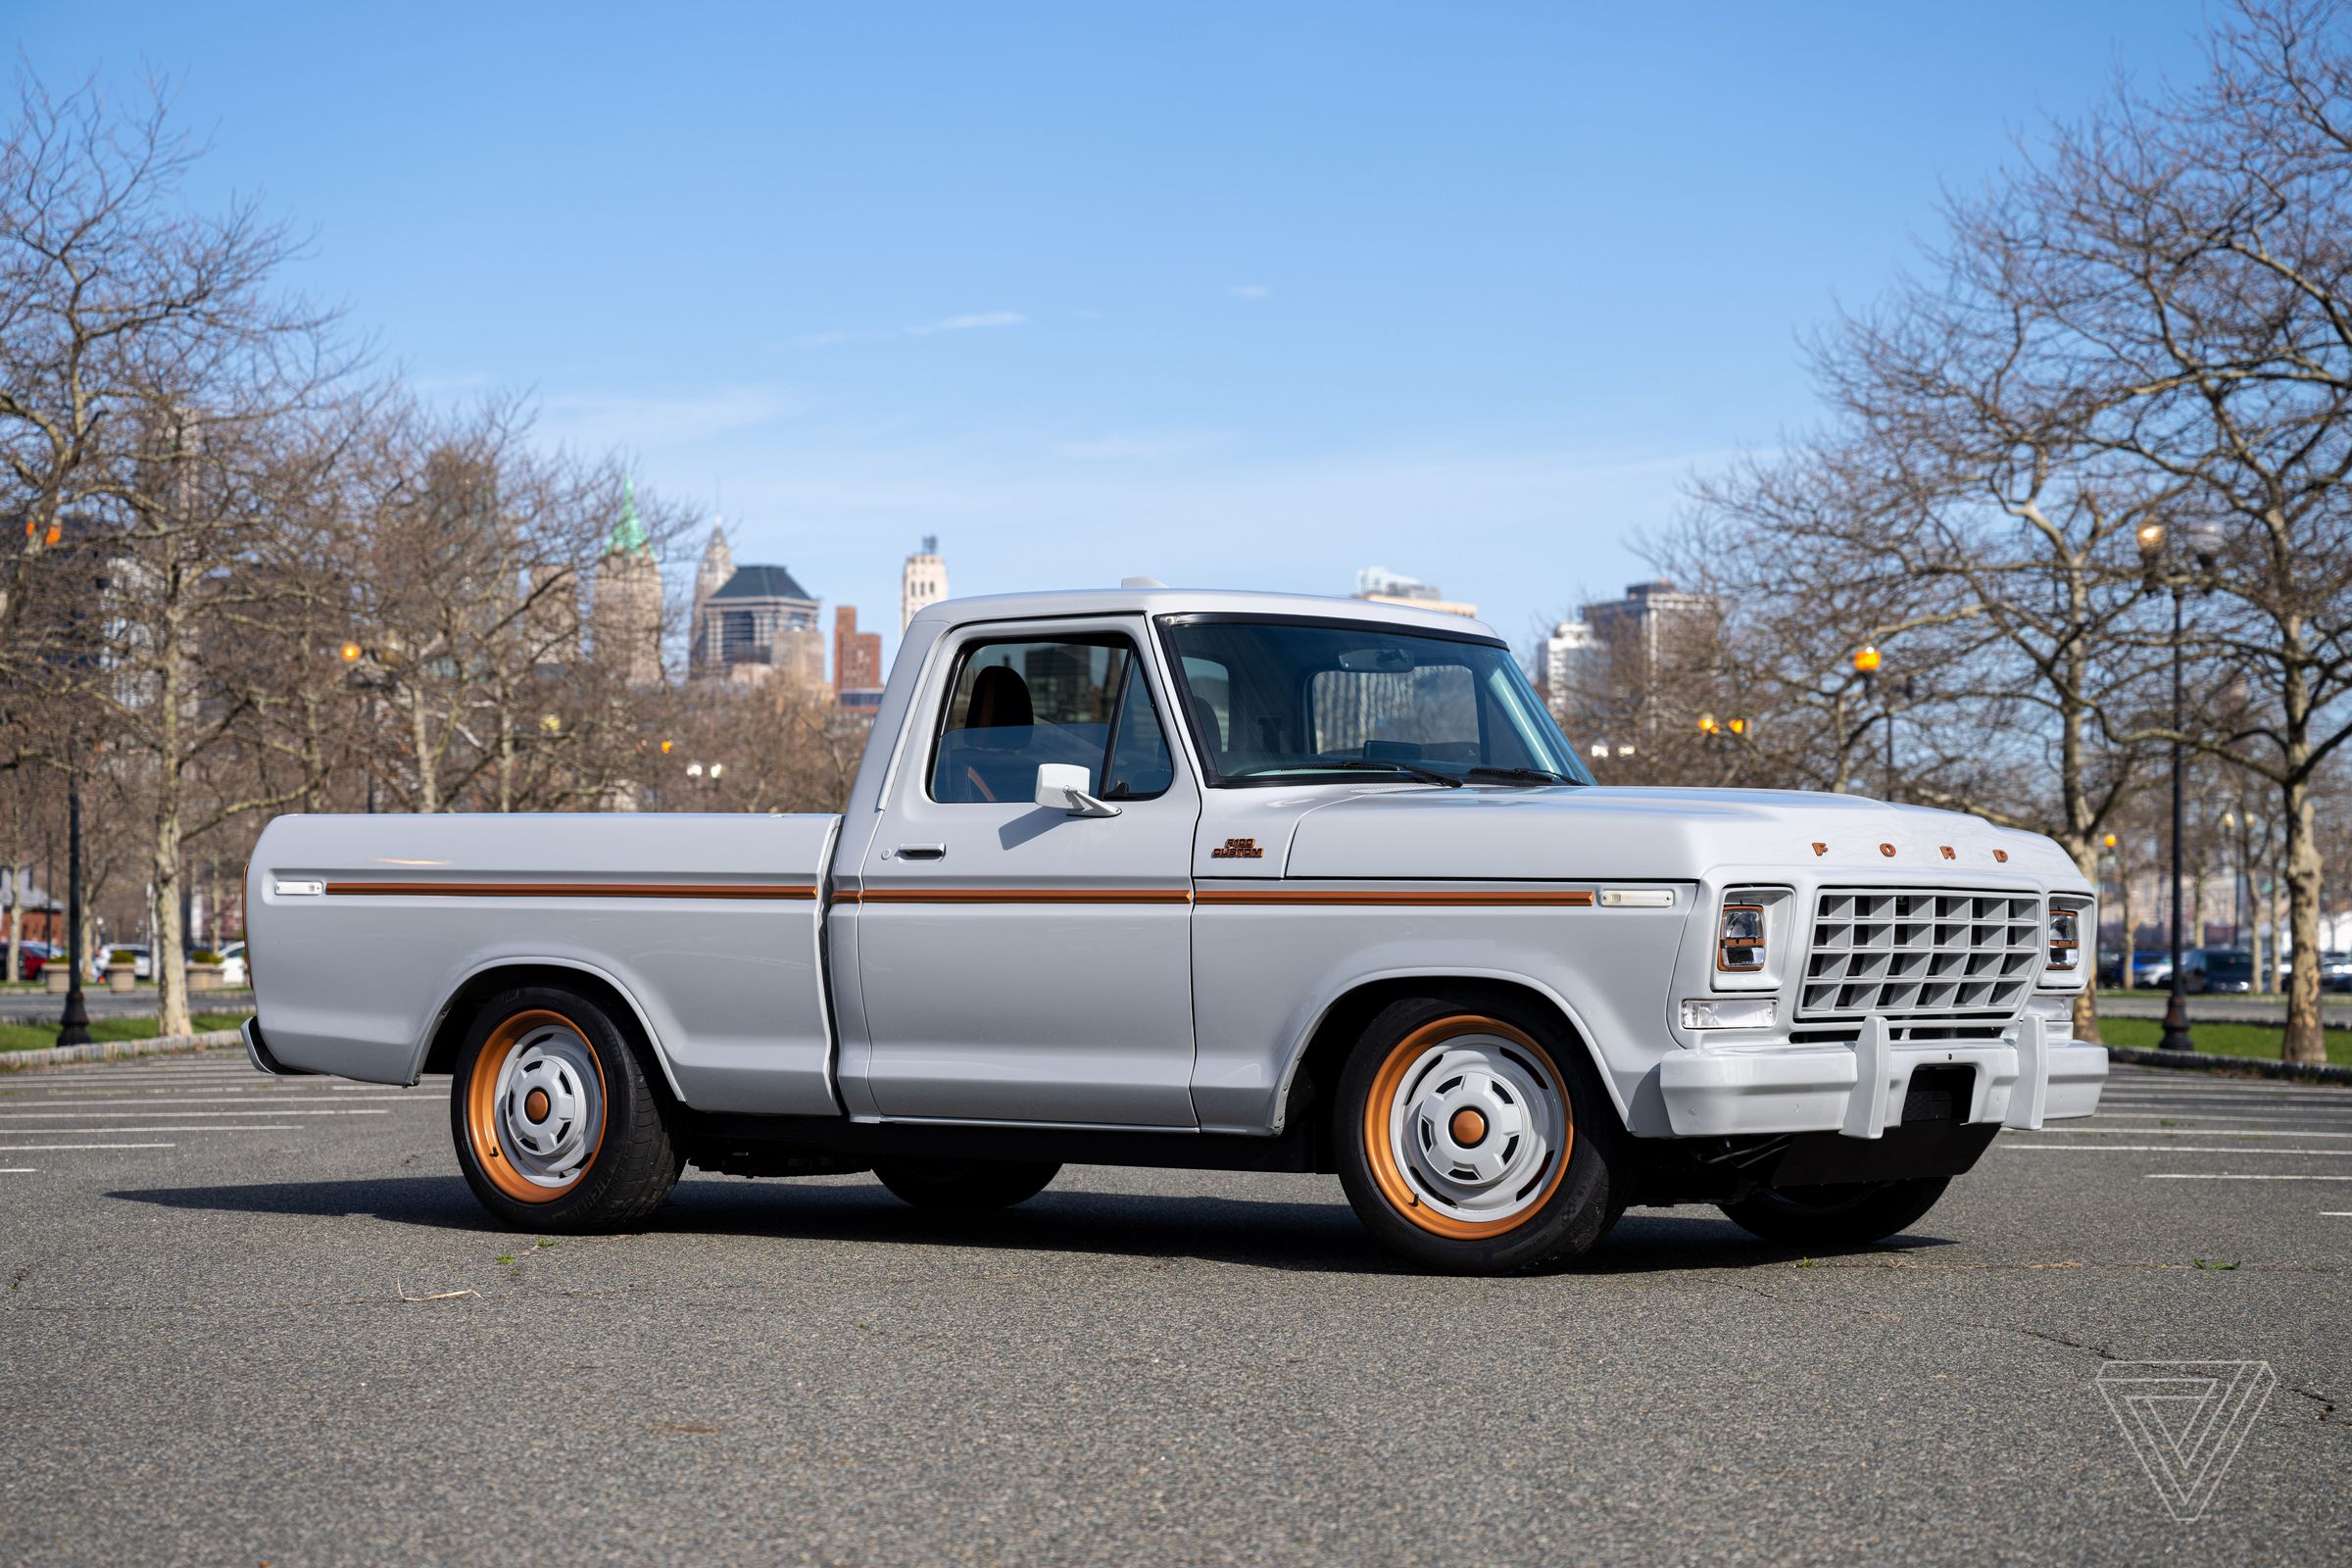 The F-100 Eluminator is a “Restomod”, meaning it is restored and modified.